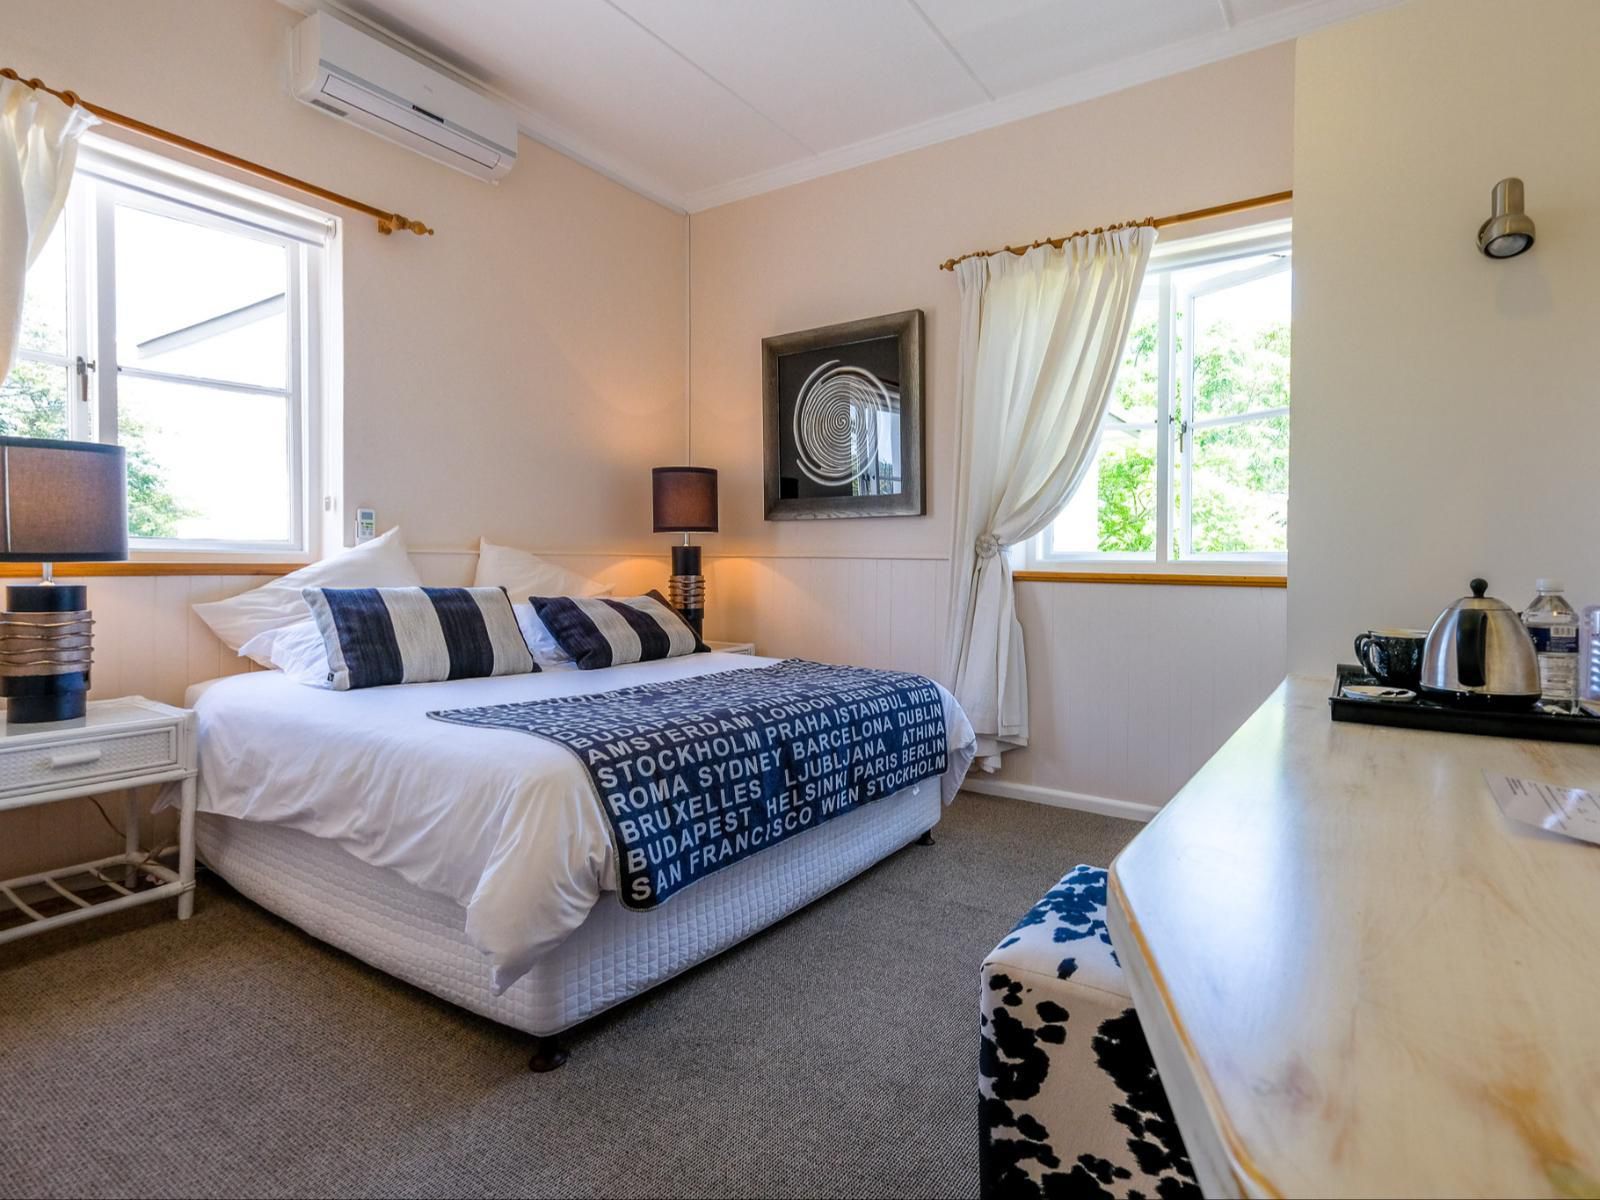 No 10 Caledon Street Guest House Camphers Drift George Western Cape South Africa Bedroom